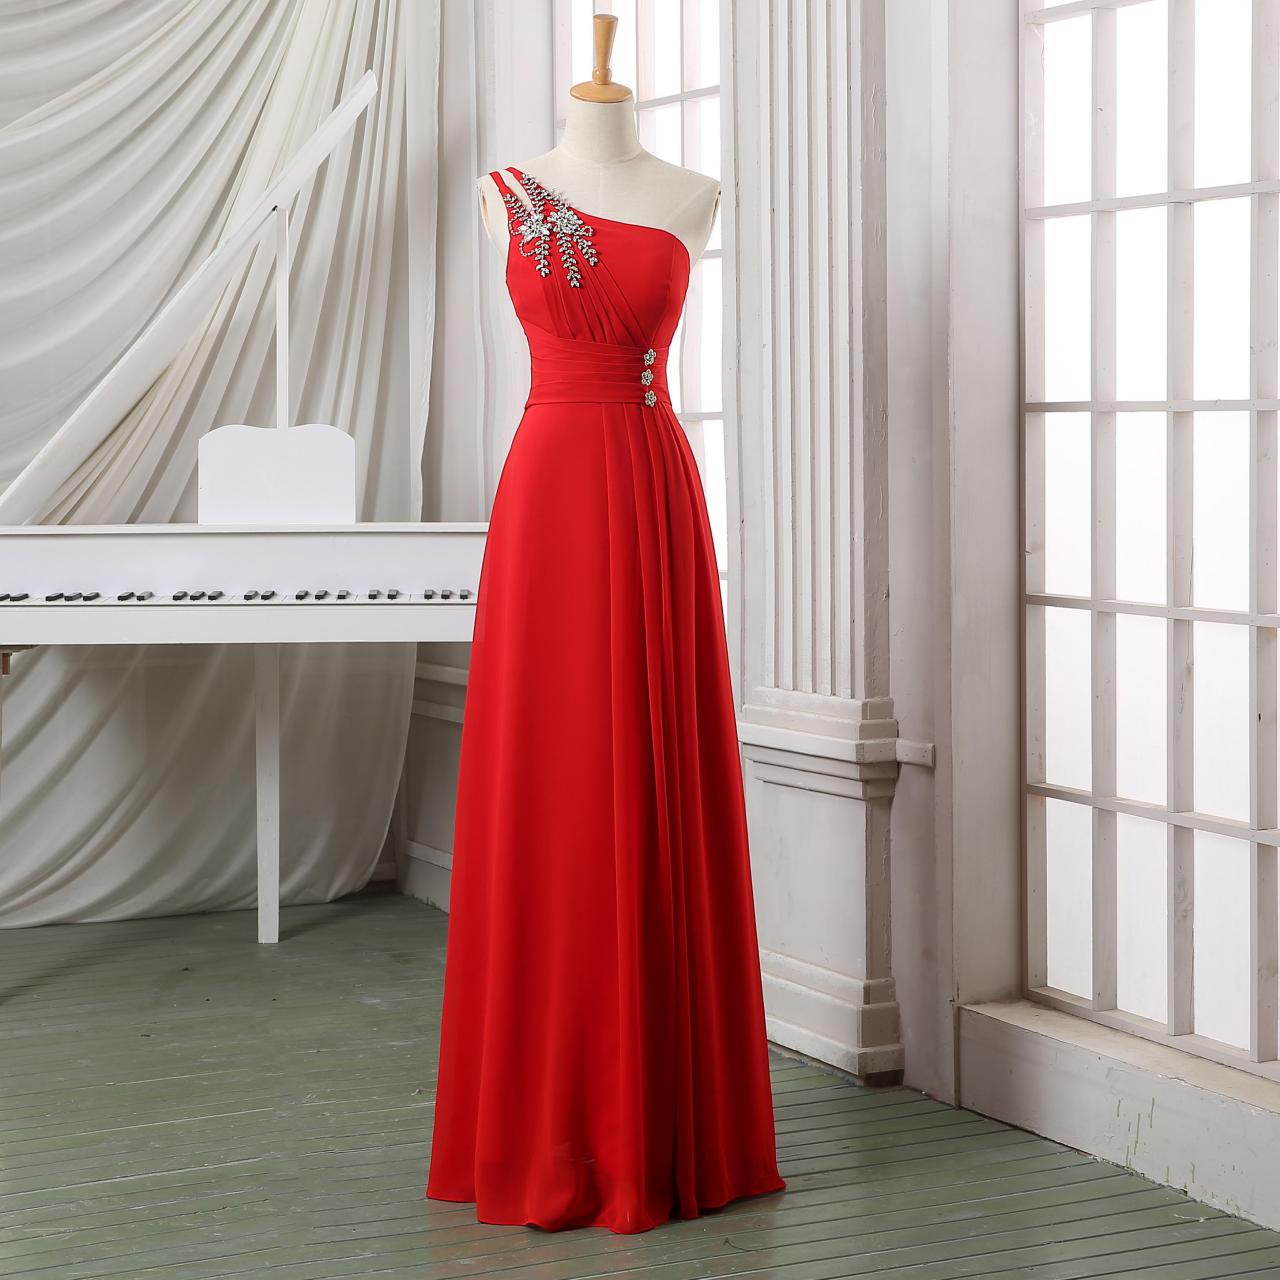 2014 Sexy Red Prom Dresses Chiffon Floor Length A-line Evening Dresses Gowns For Party Formal Dresses